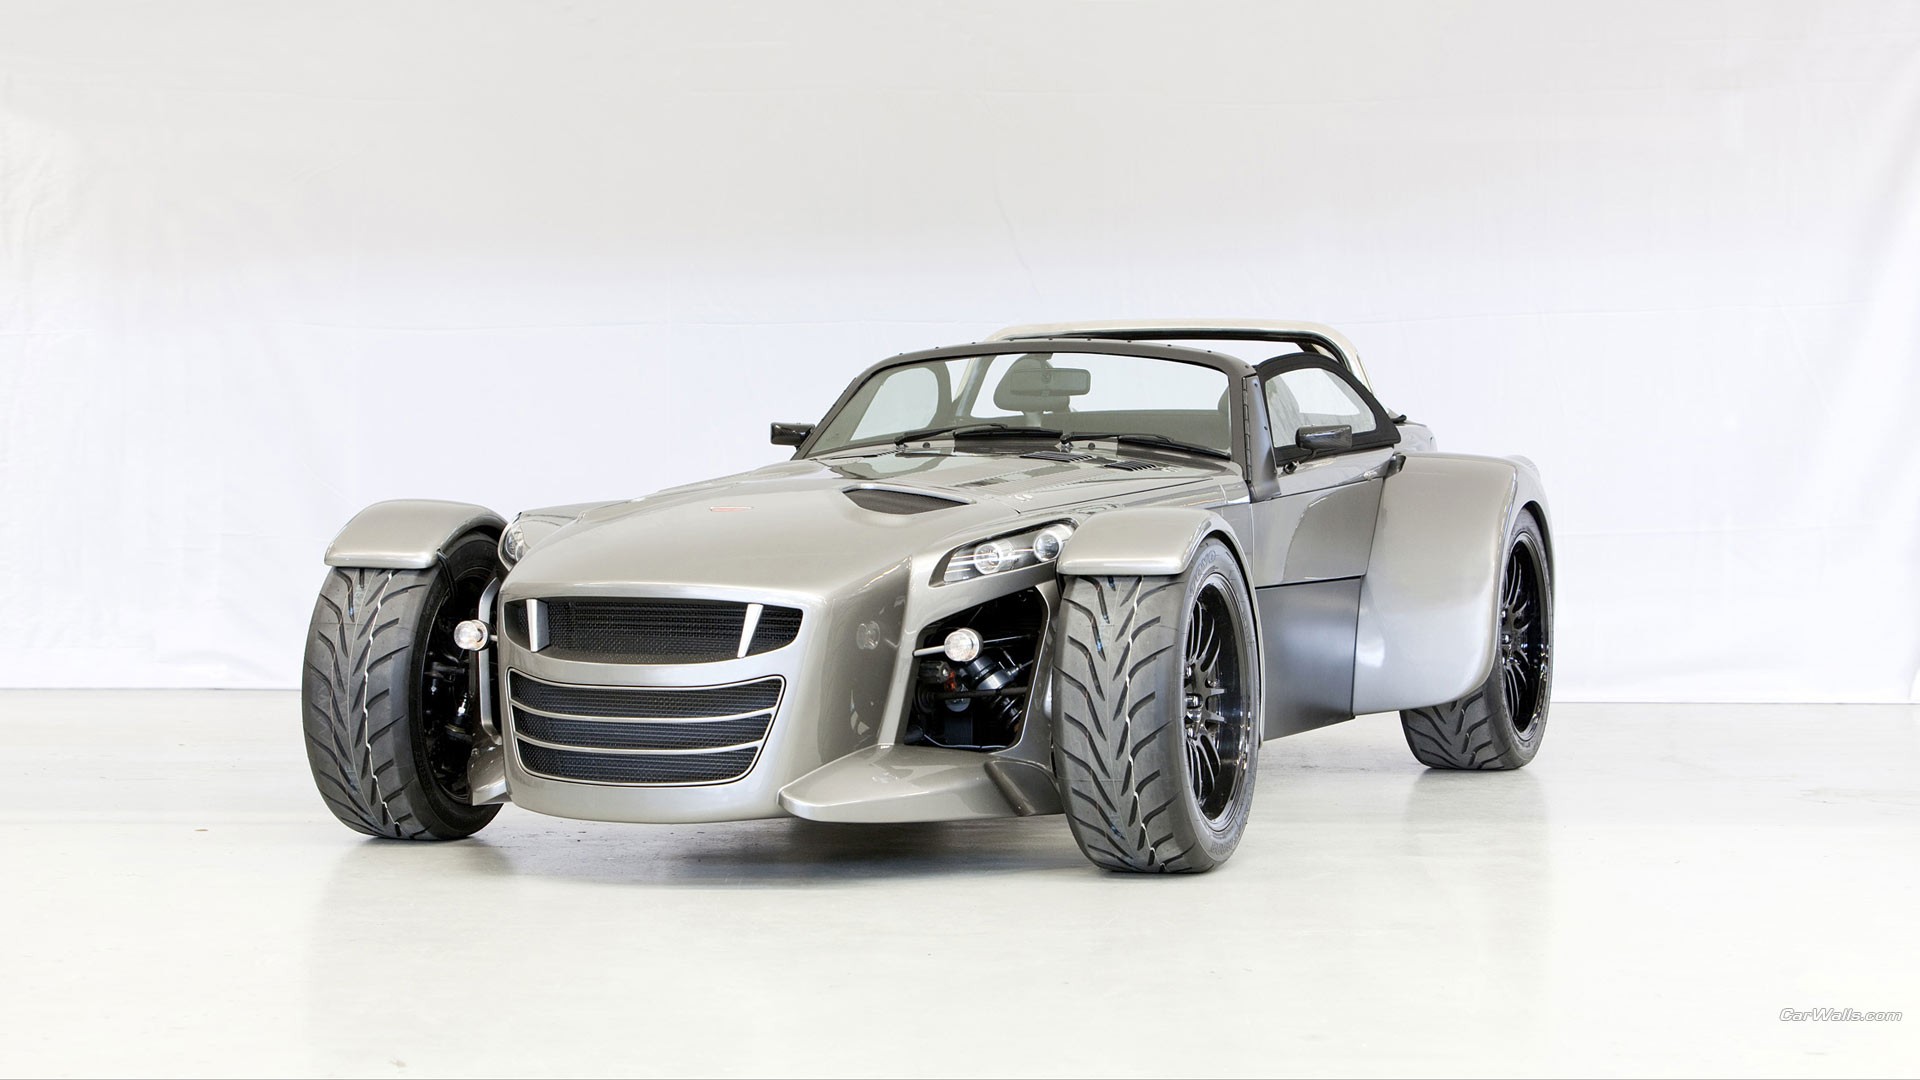 General 1920x1080 Donkervoort D8 GTO car gray cars sports car cabriolet vehicle Dutch cars